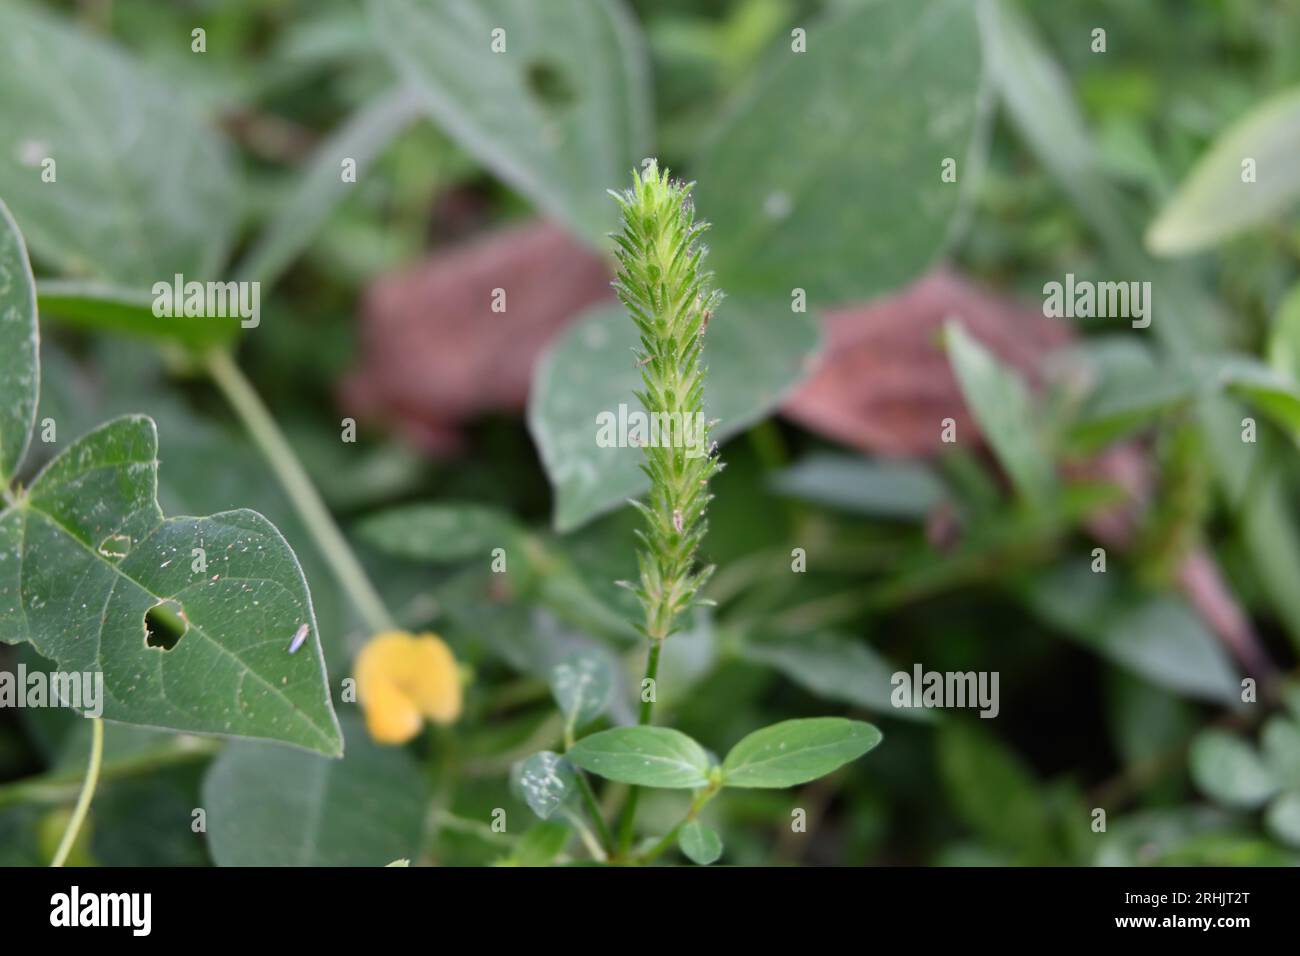 An inflorescence of tiny grass flowers bloomed near the ground in a lawn area Stock Photo